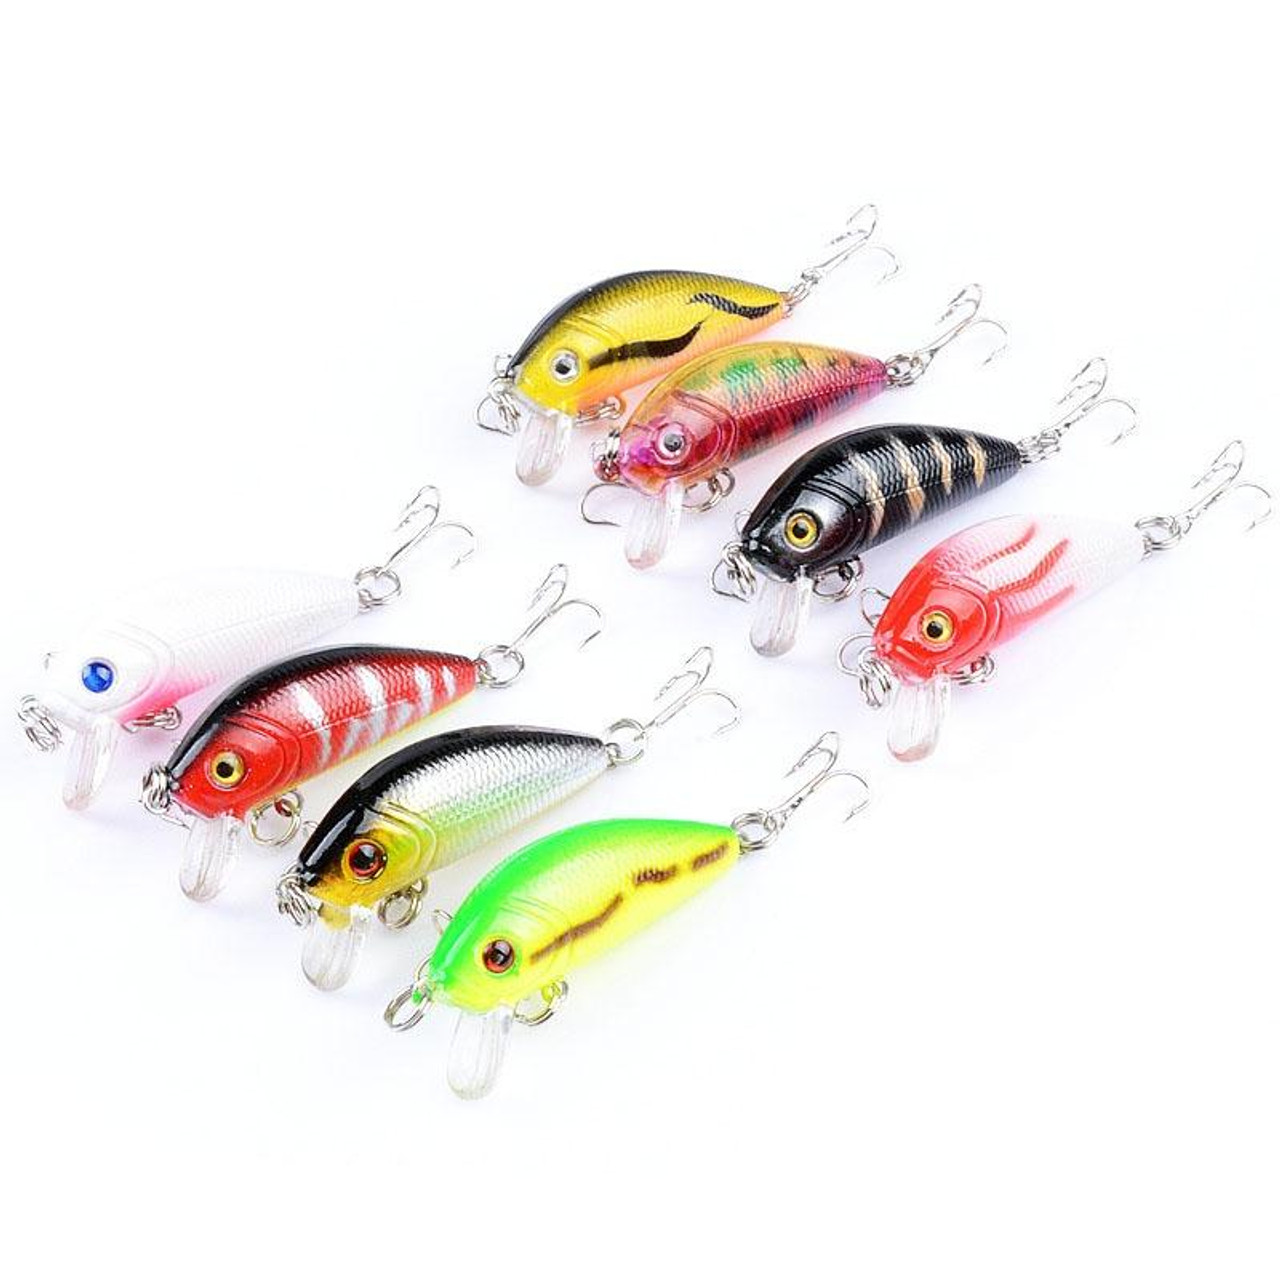 PROBEROS LF127 Long Casting Bait Small Leader Freshwater Sea Bass Fishing  Warbler Spinnerbait, Size: 10g(Color